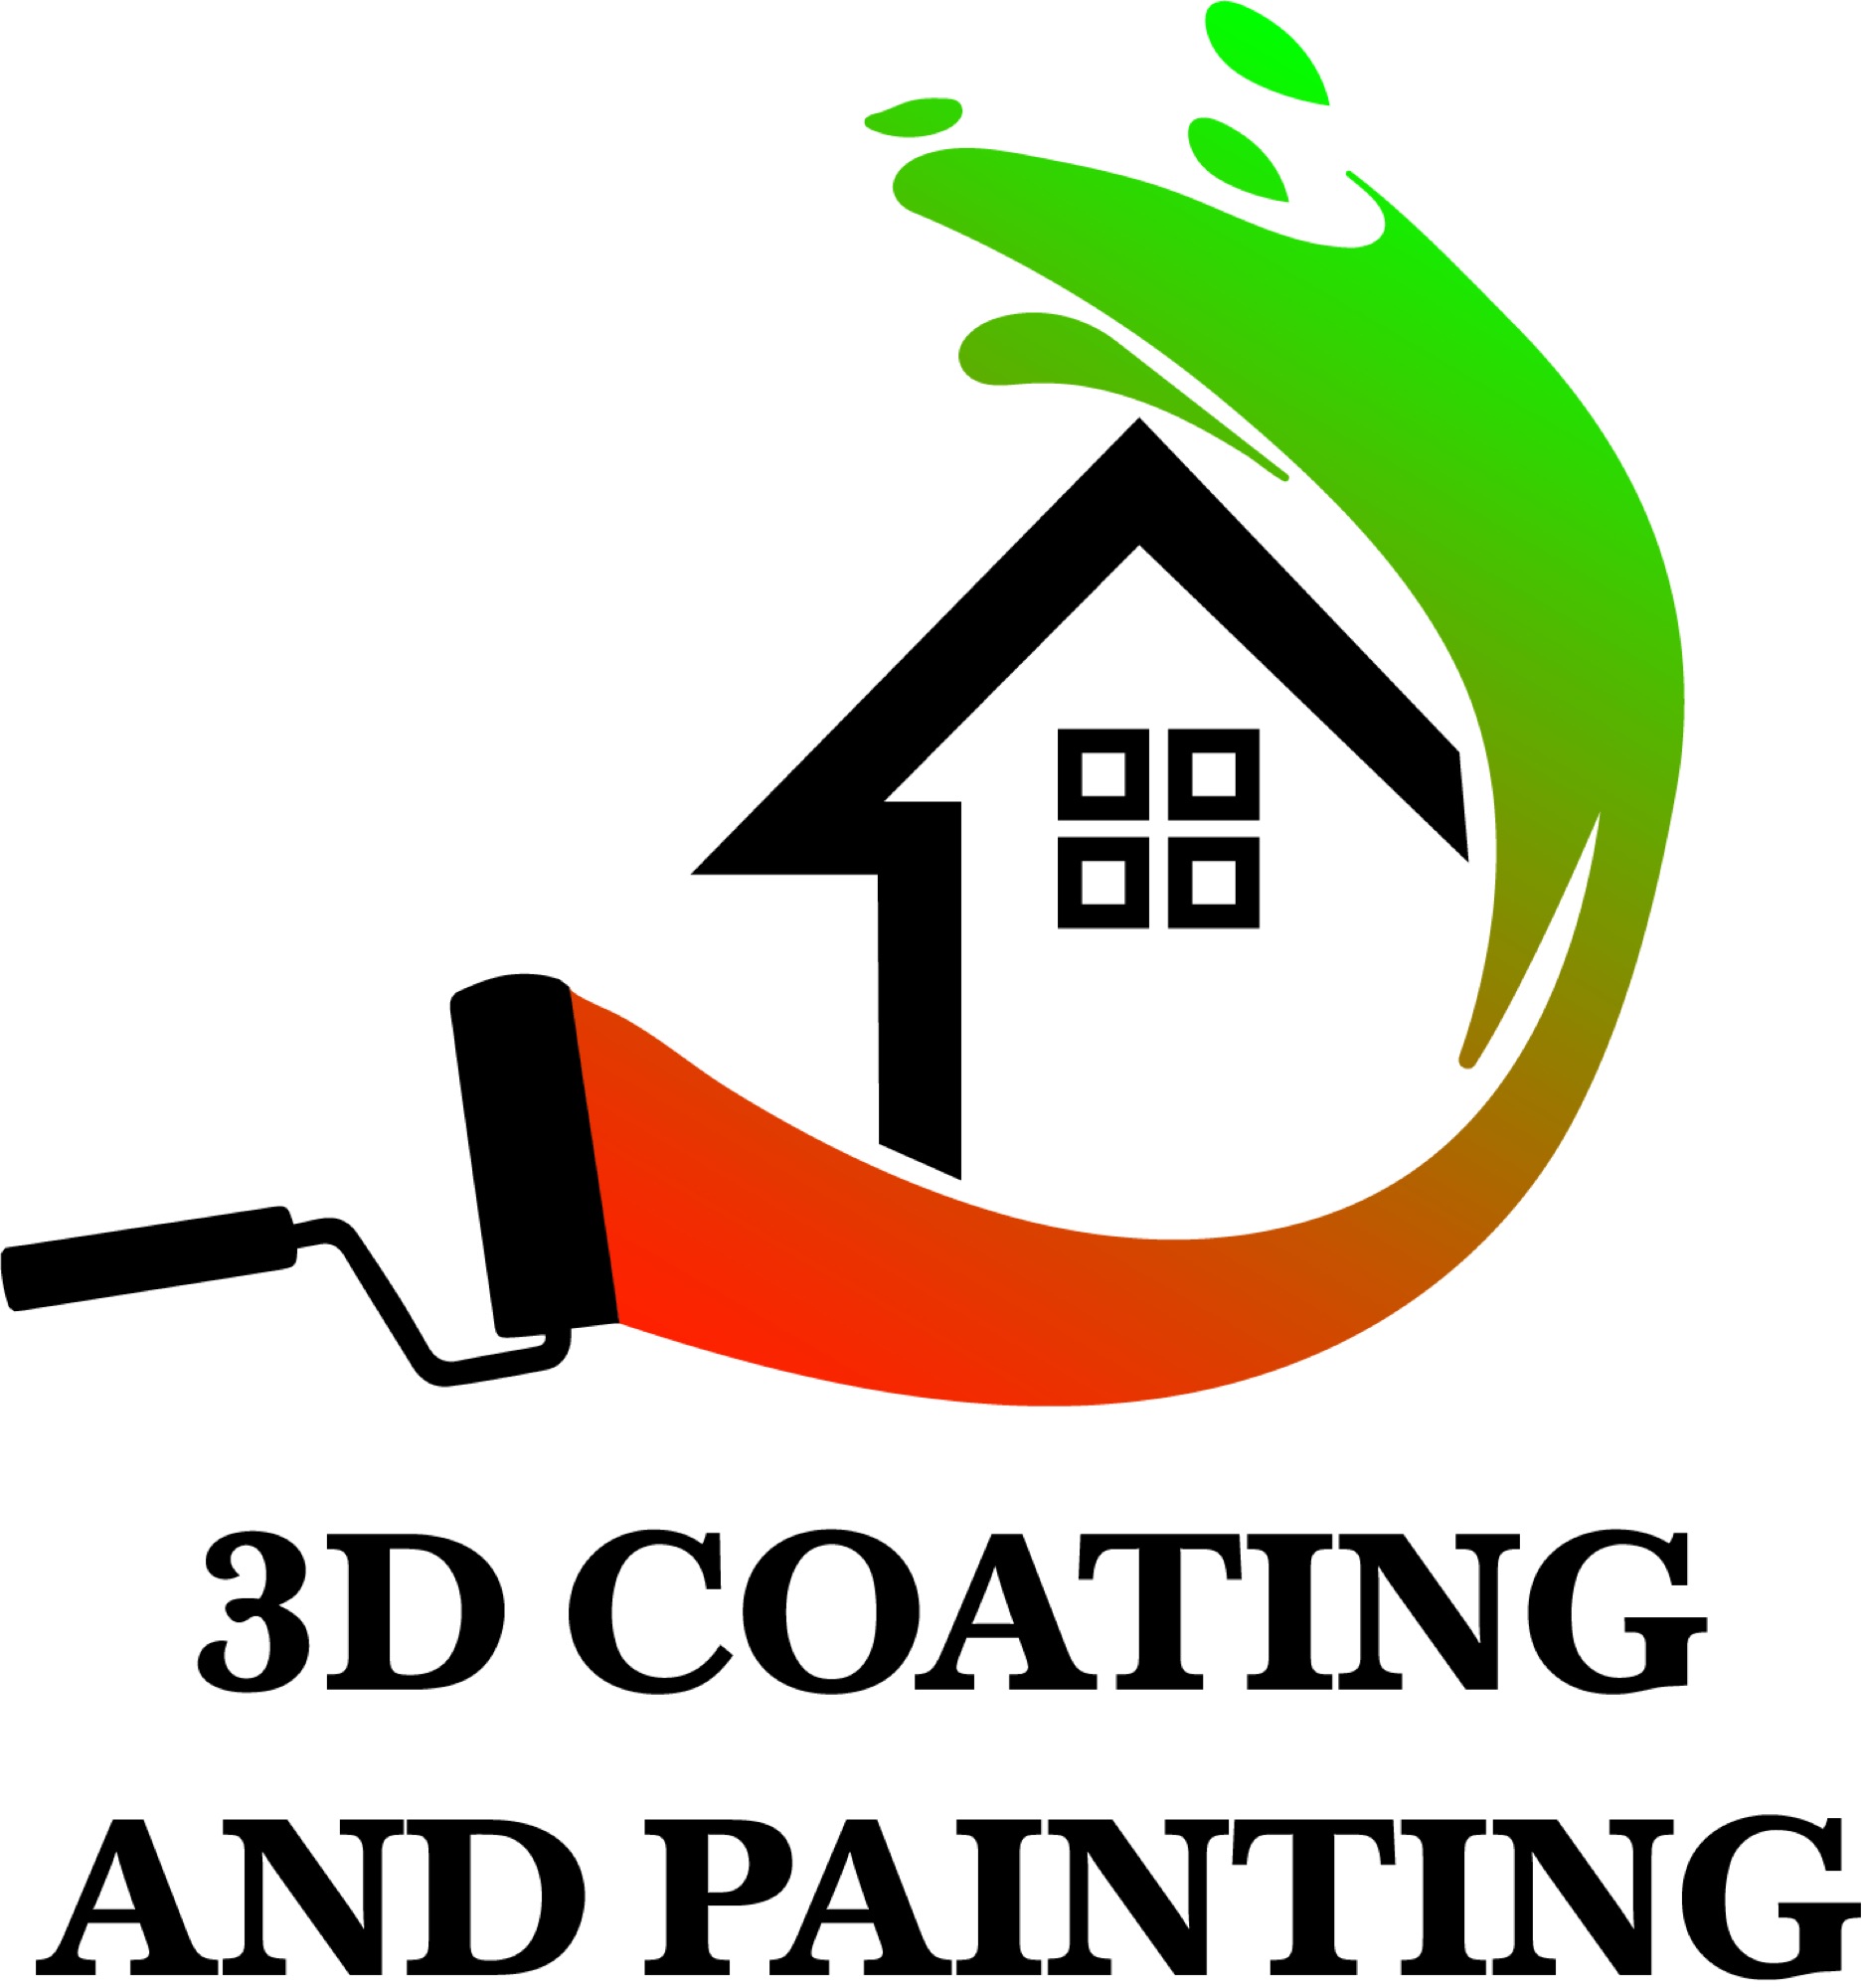 3D Coating and Painting Logo